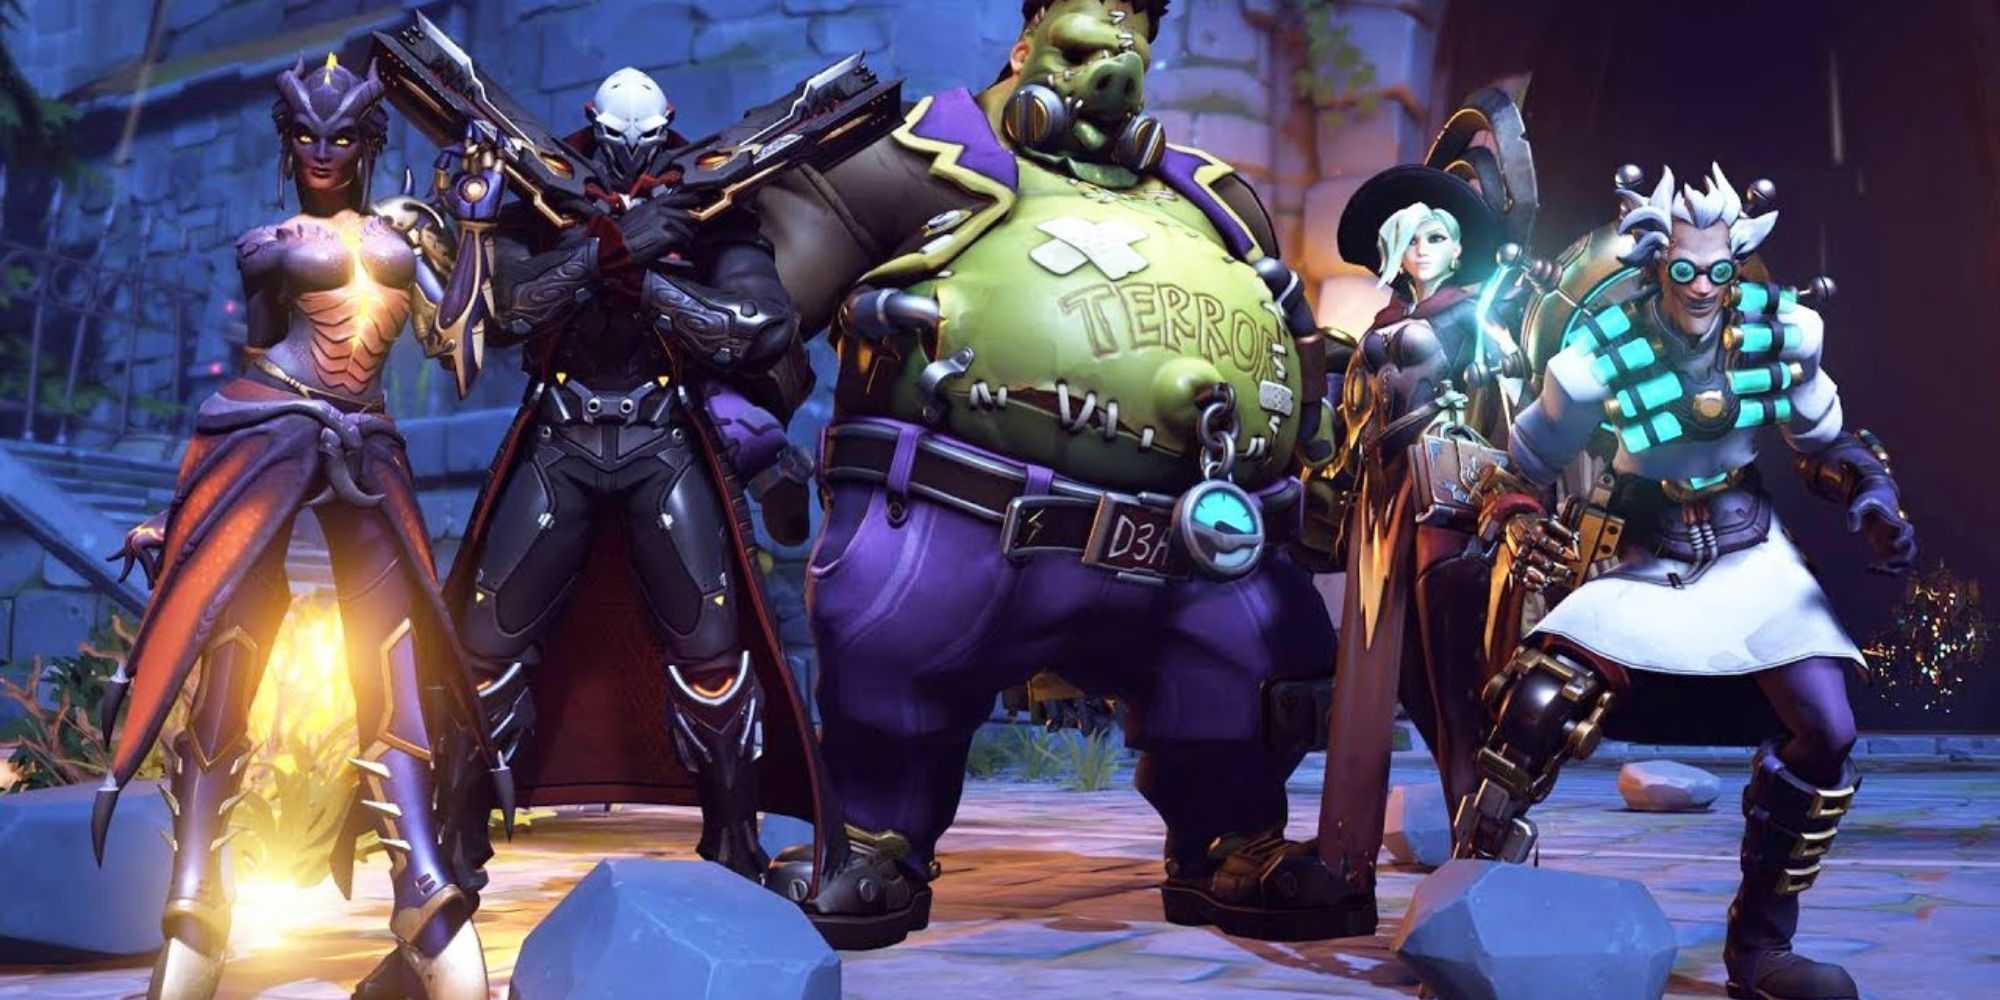 Five of the Halloween skins from Overwatch